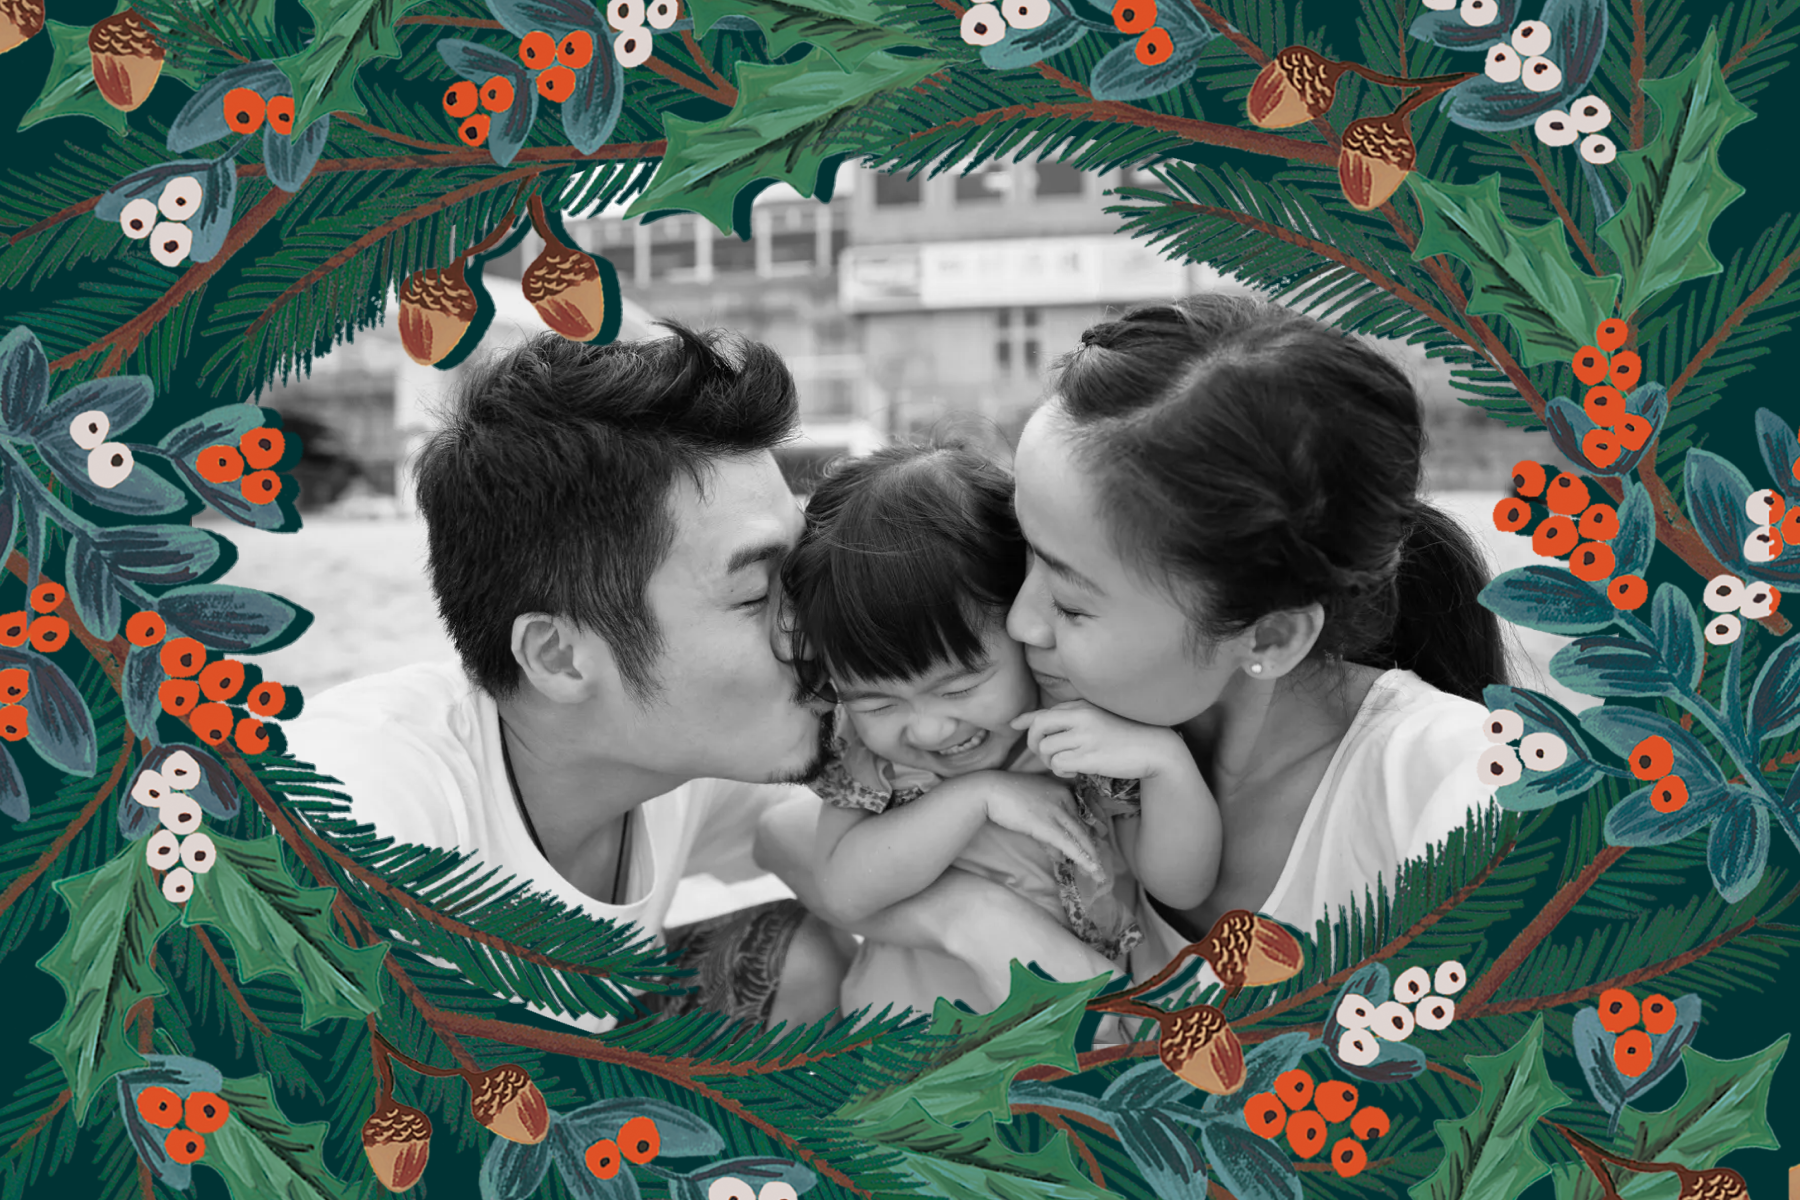 Two parents kissing their child on the cheek surrounded by a festive greenery frame.